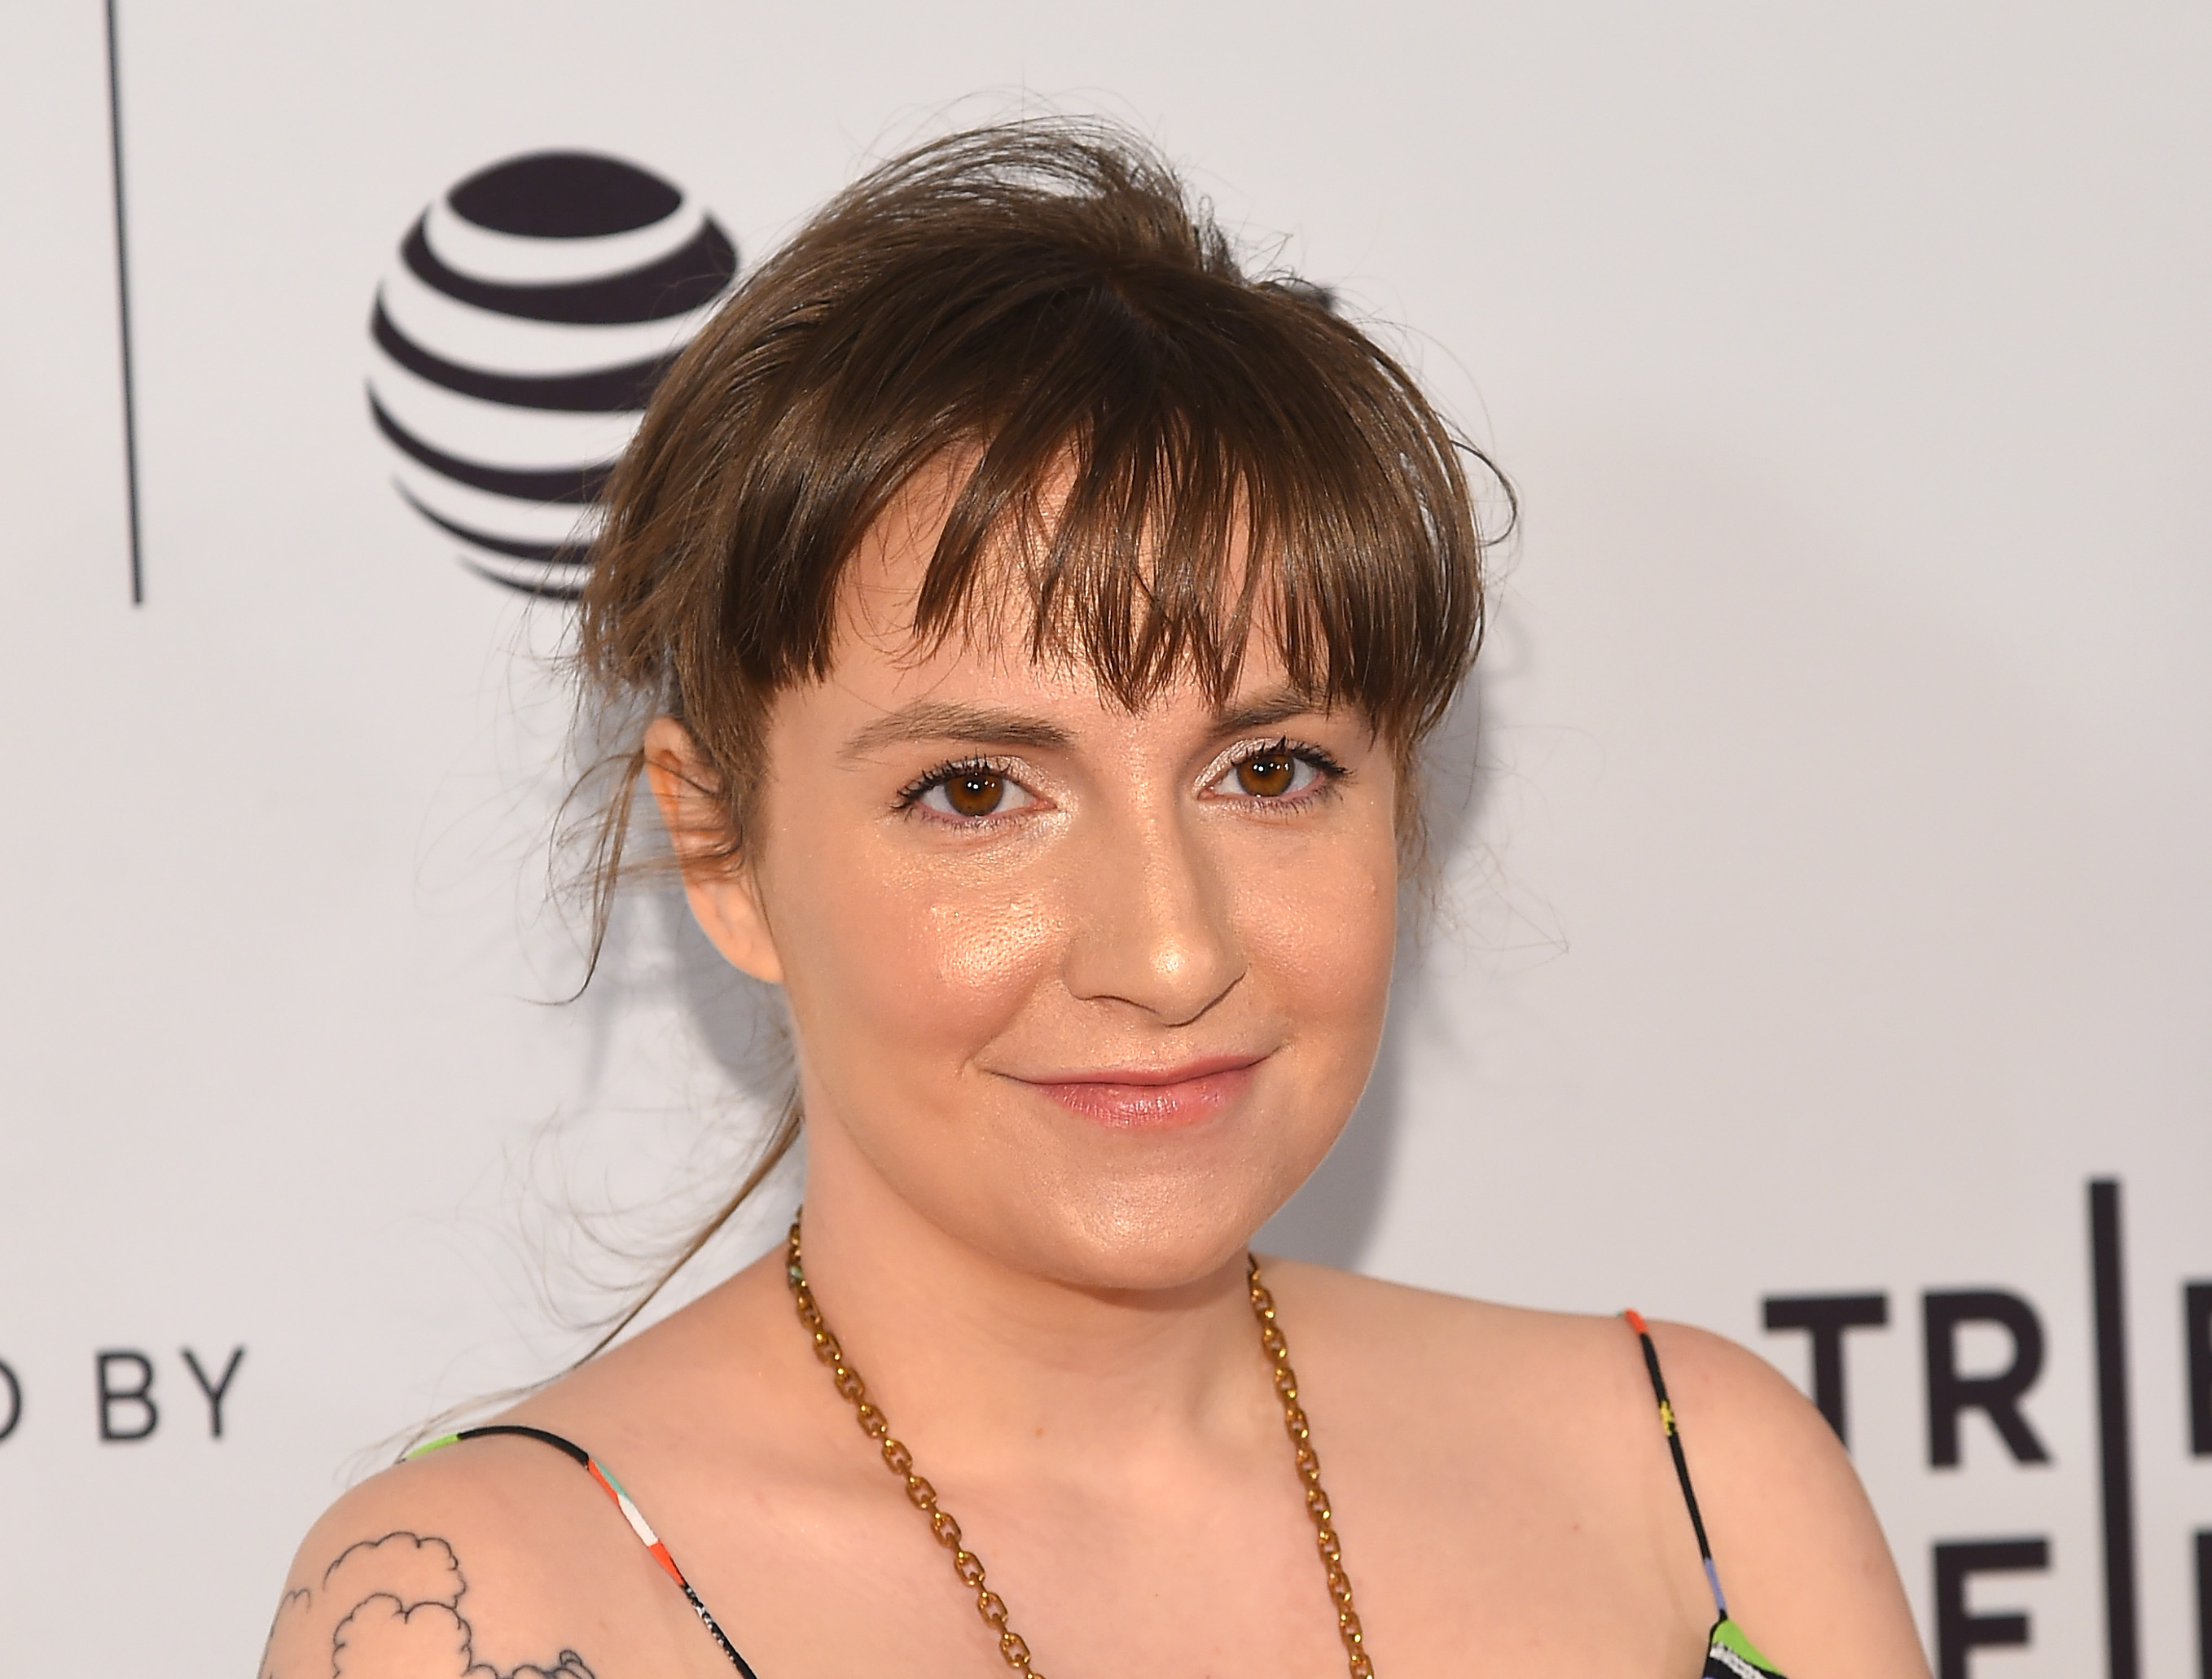 Lena Dunham attends "My Art" premiere during the 2017 Tribeca Film Festival at Cinepolis Chelsea in New York on April 22, 2017. (Ben Gabbe—Getty Images/Tribeca Film Festival)